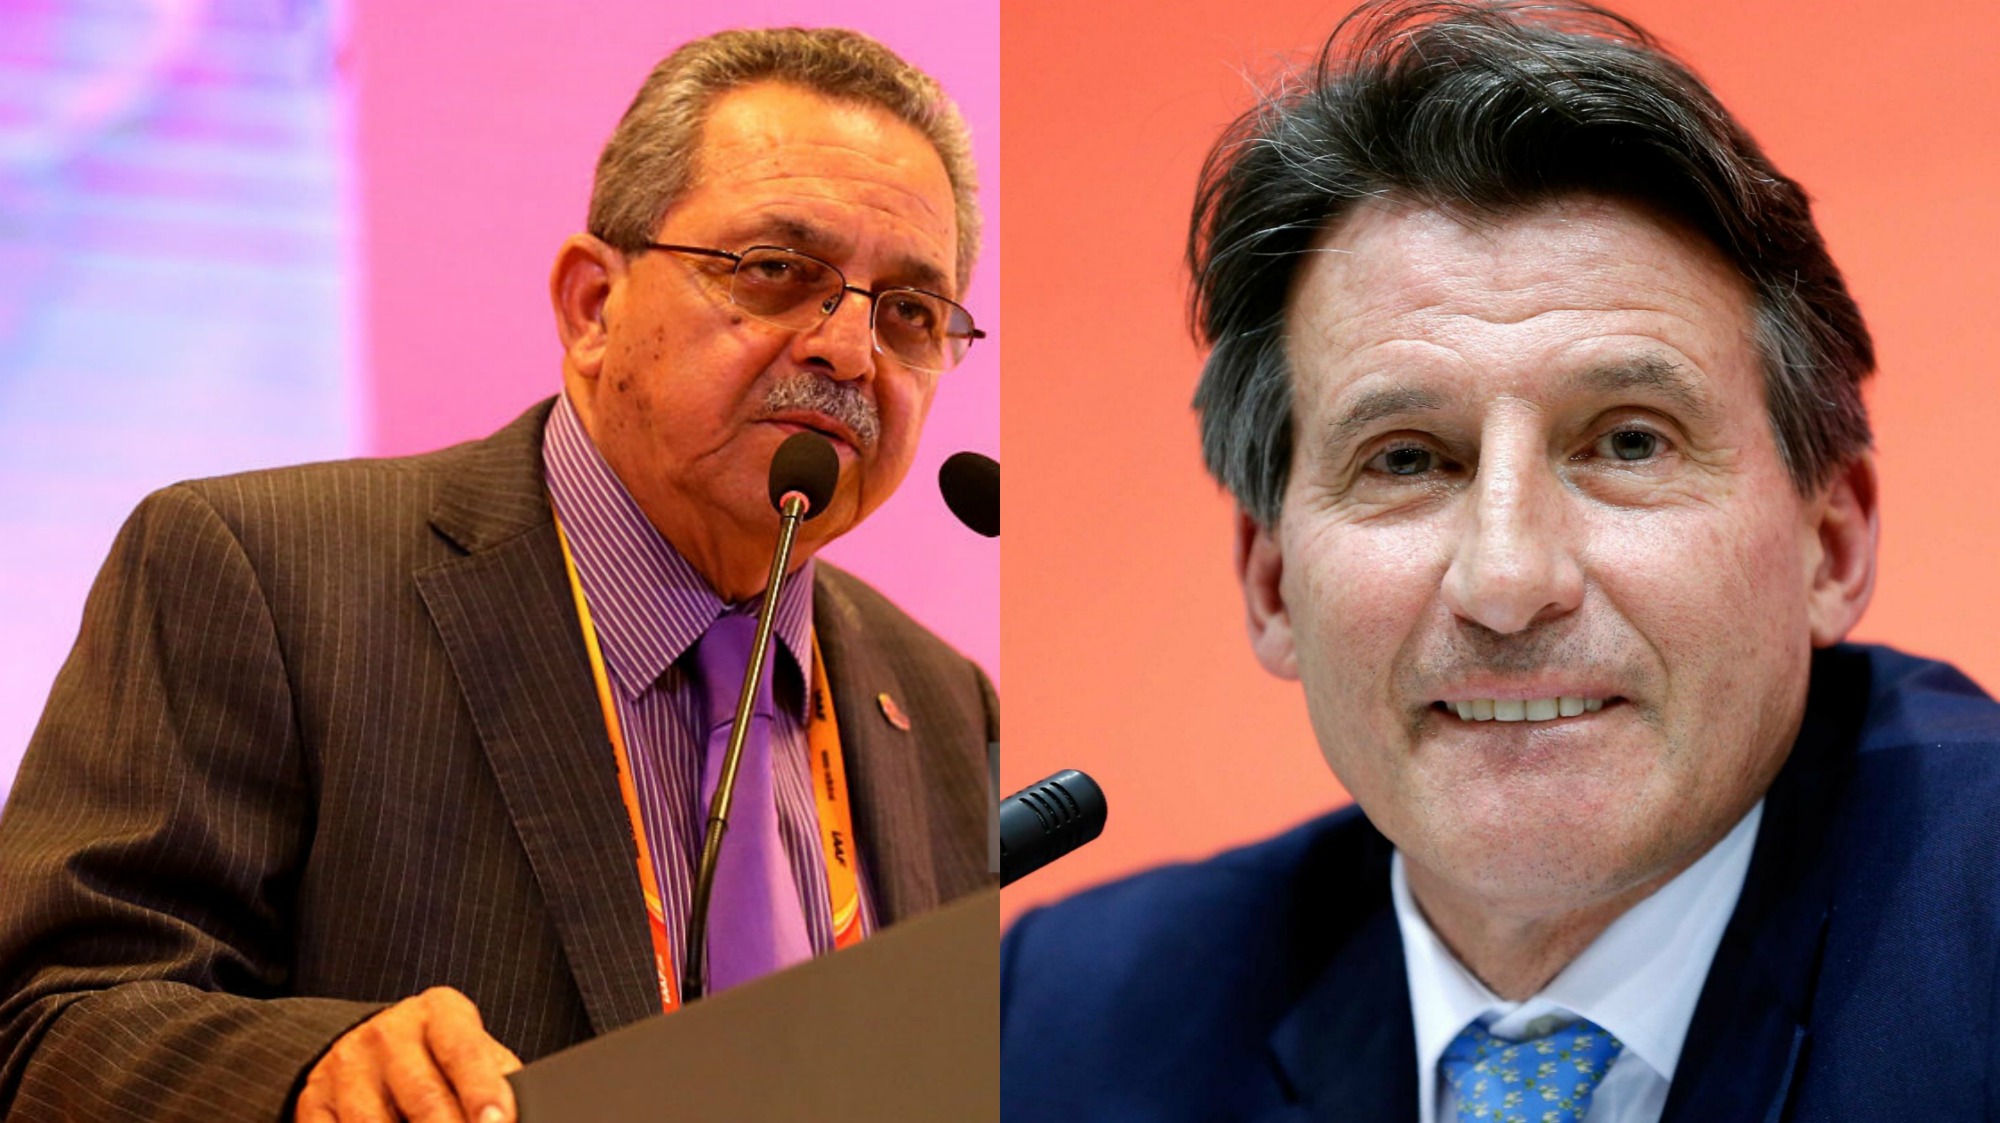 IAAF President to attend NACAC Council Meeting